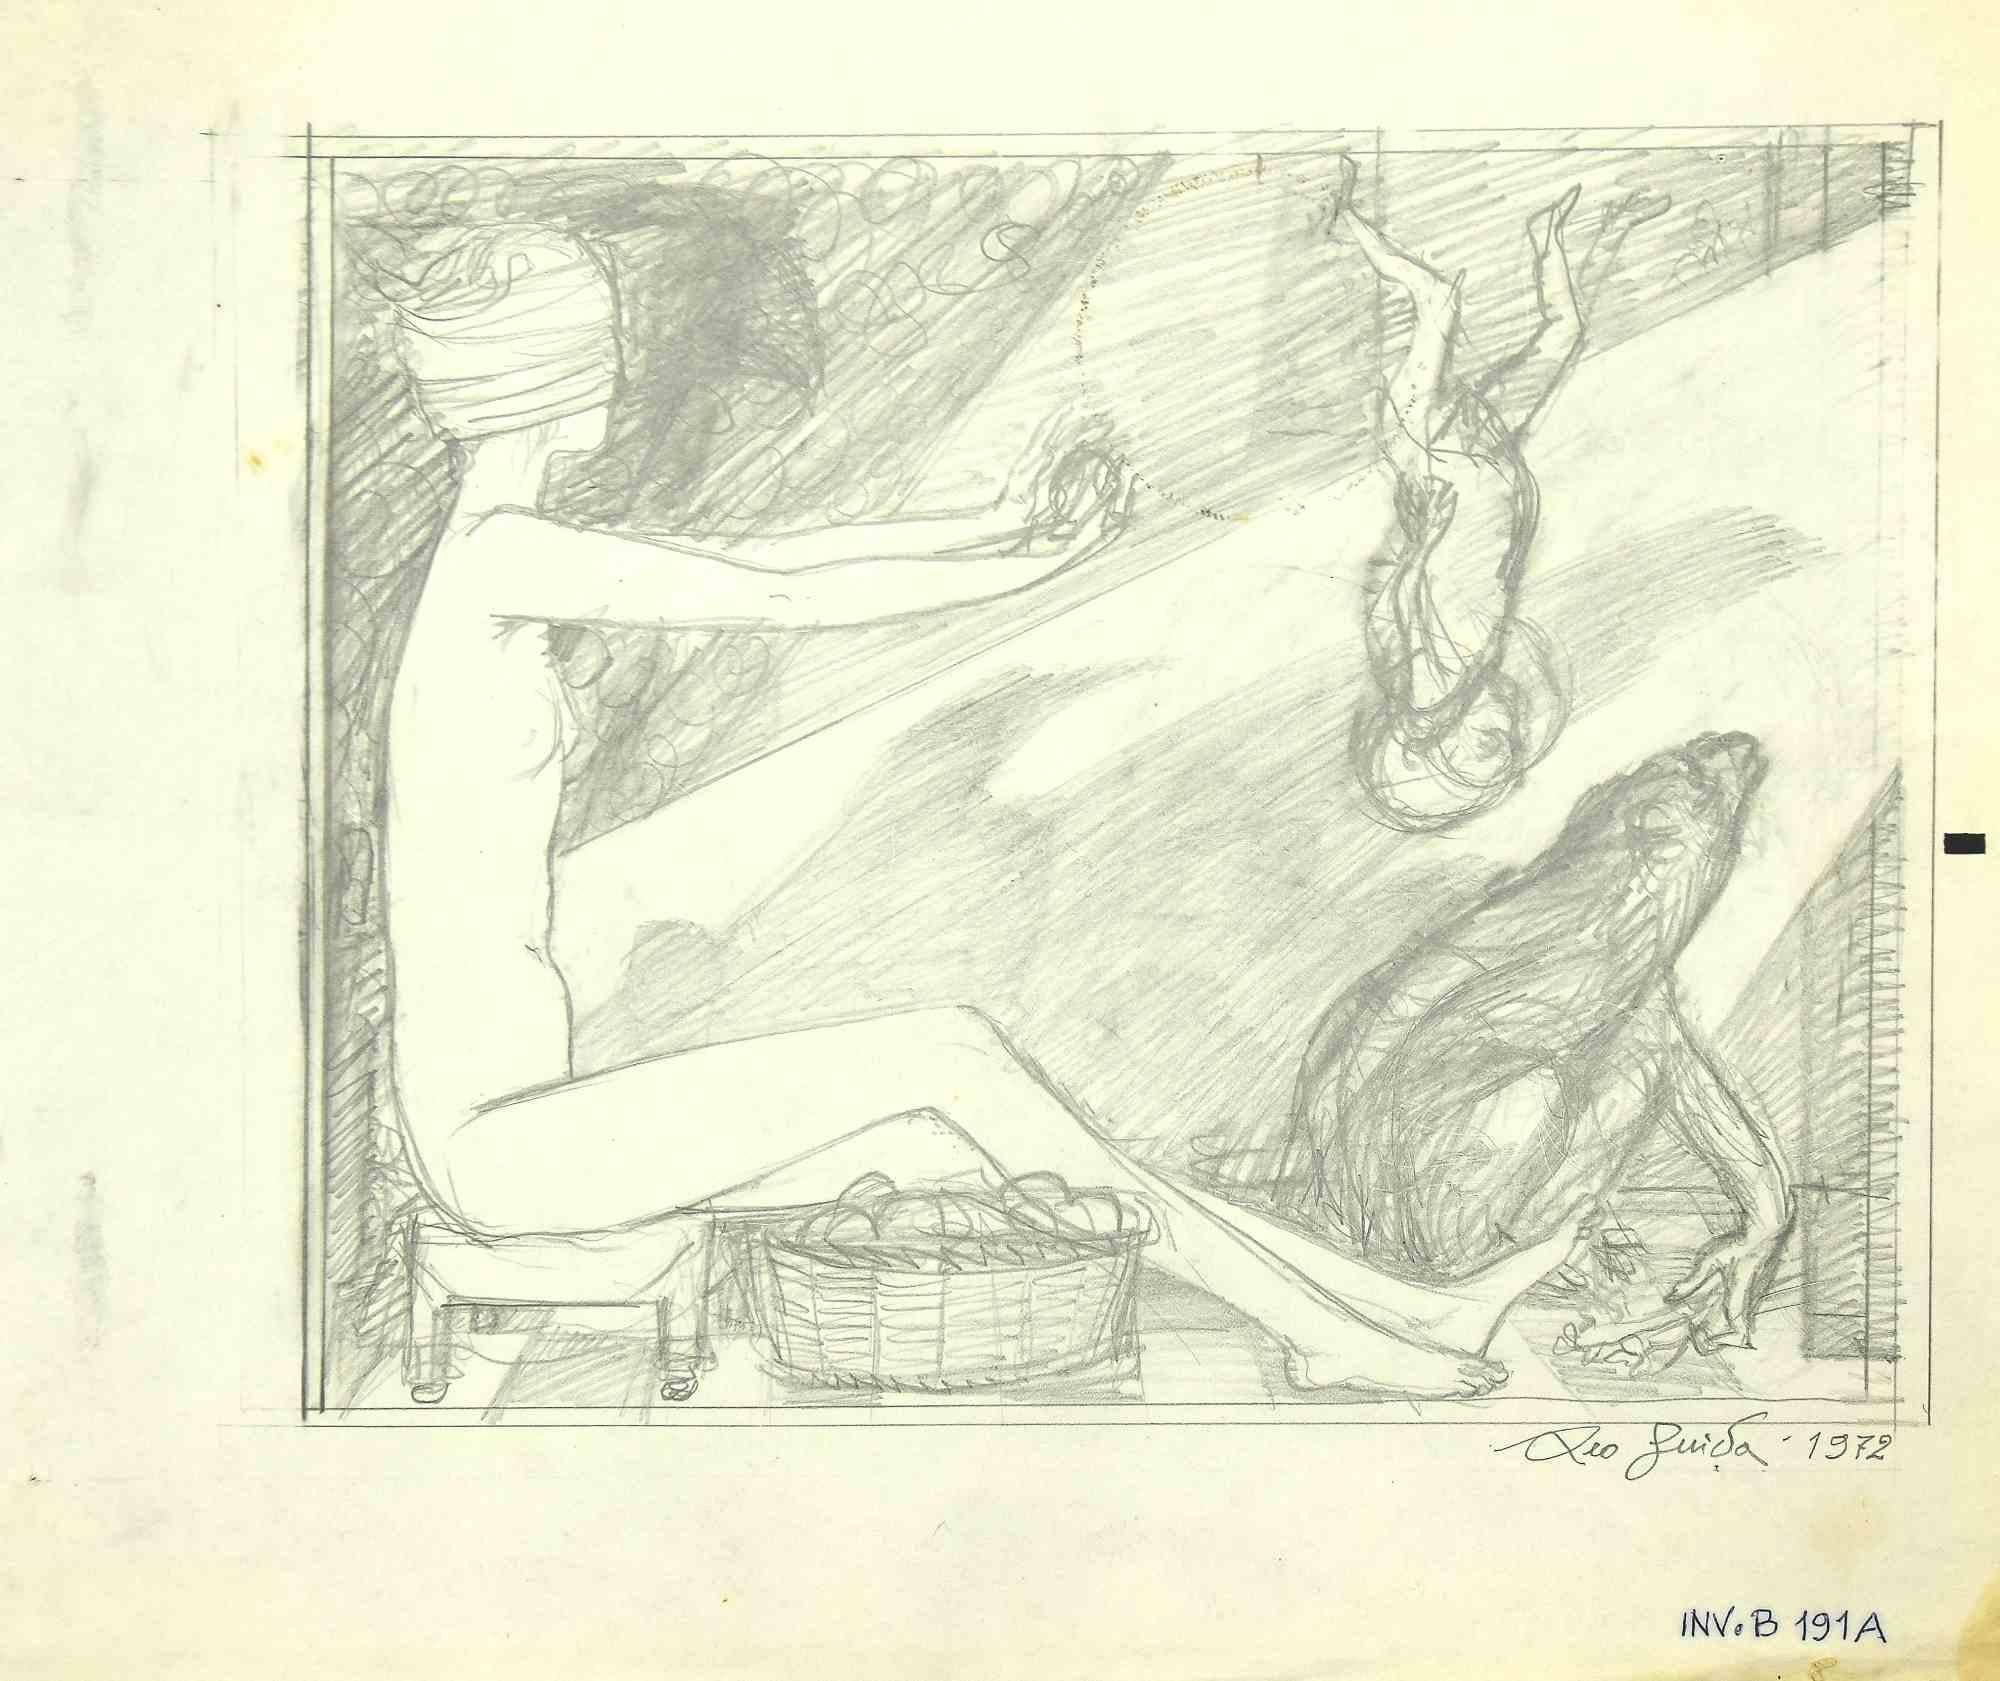 The Sybil - Drawing by Leo Guida - 1972